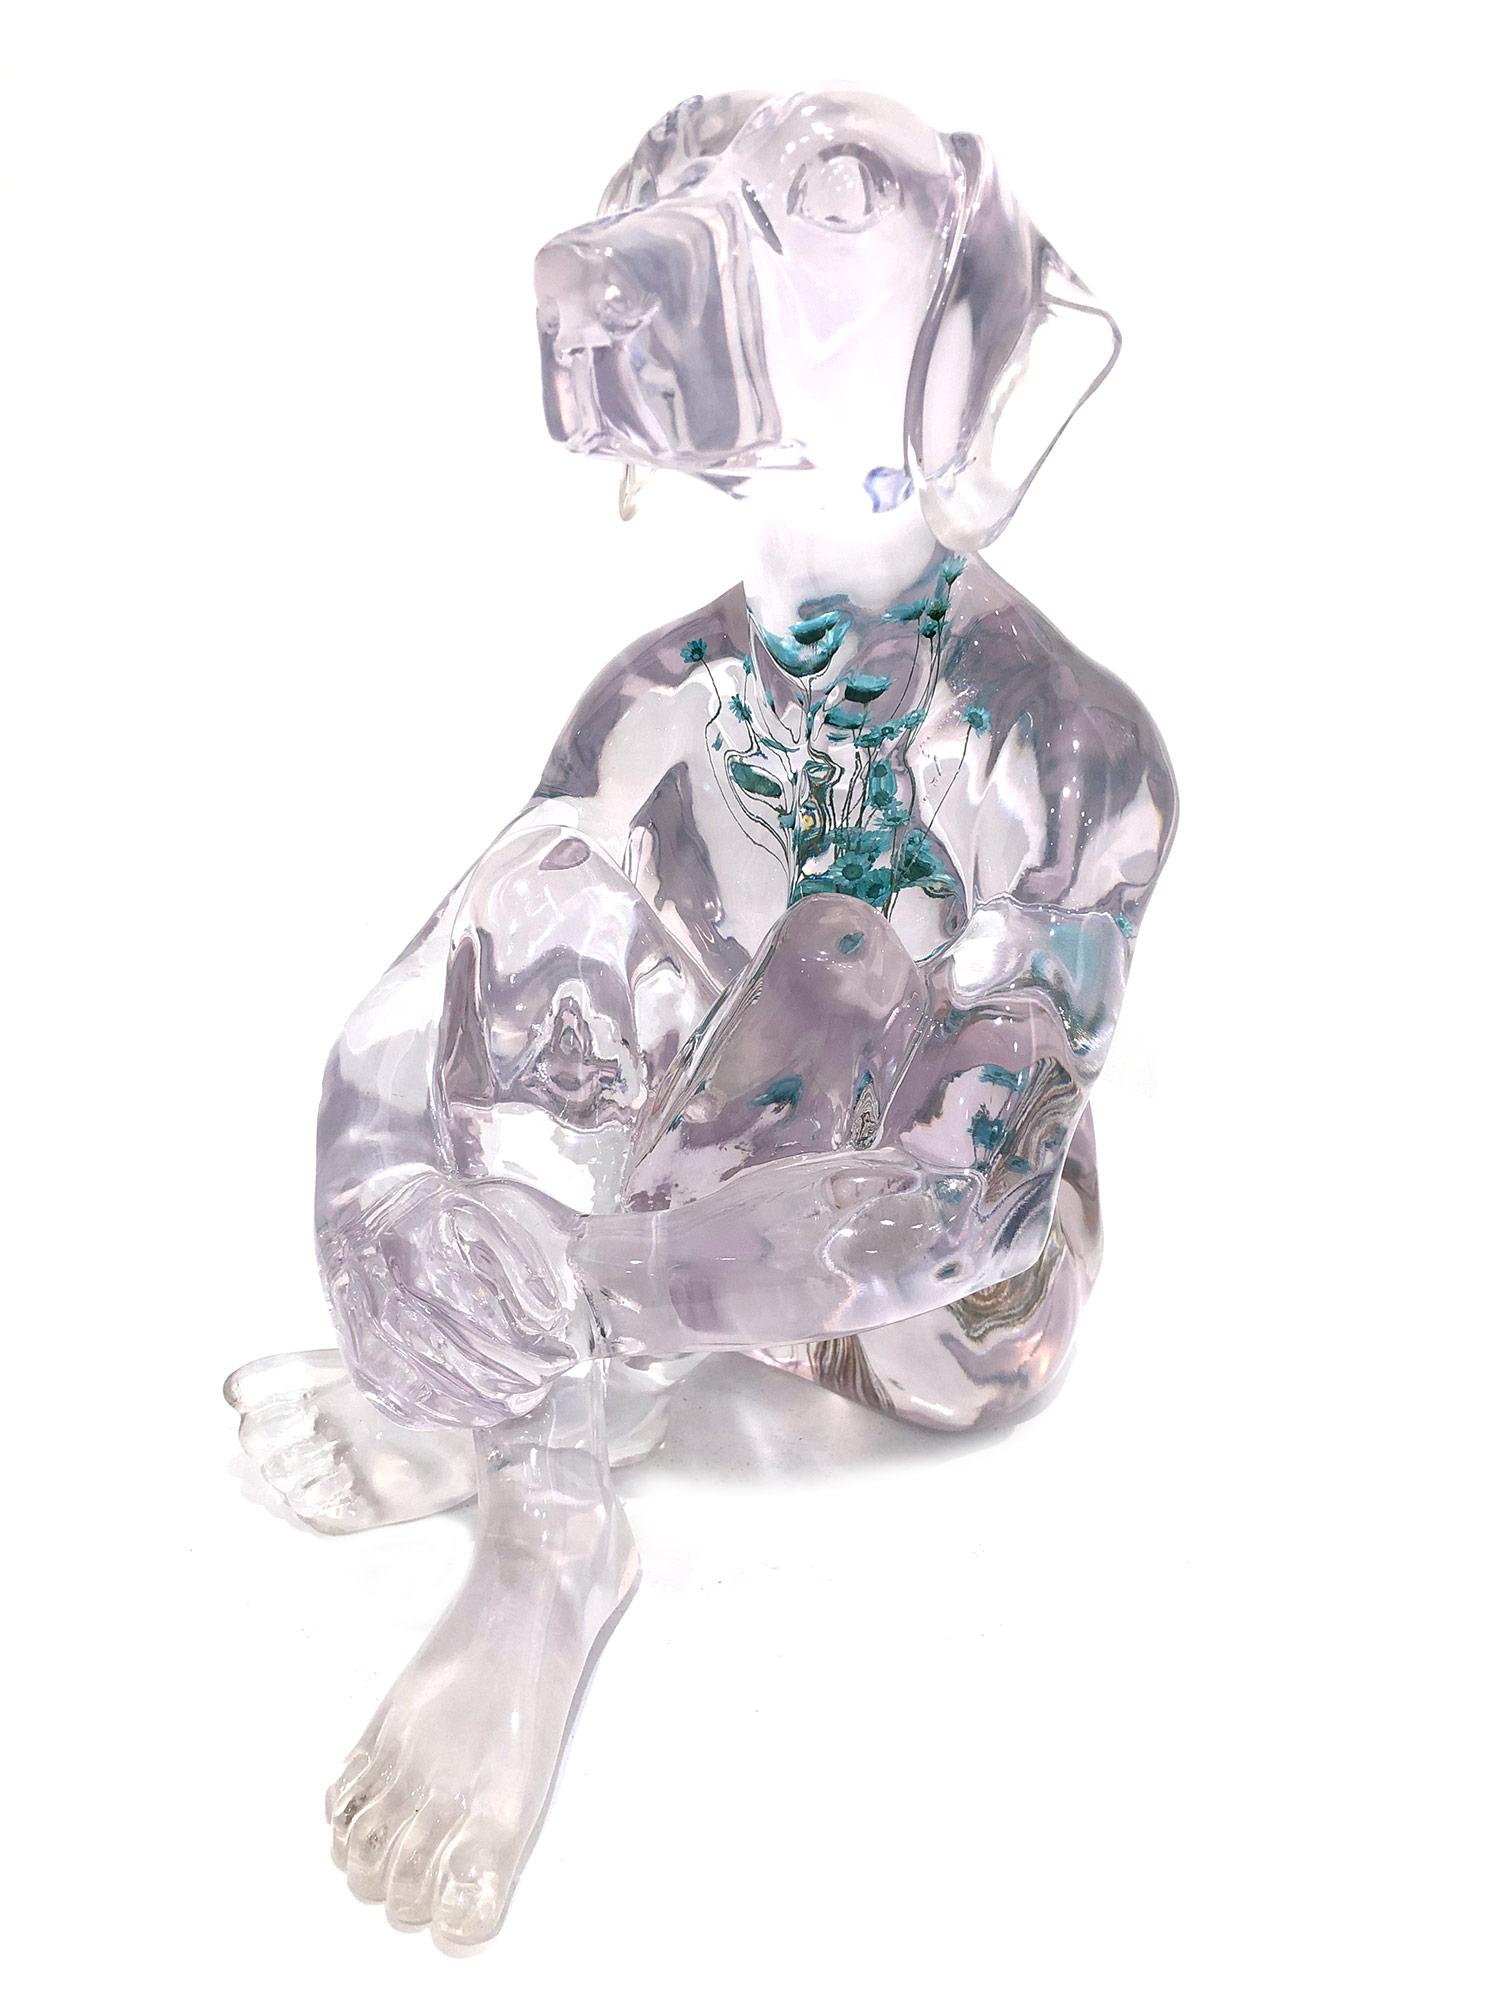 Gillie and Marc Schattner Figurative Sculpture - "He had Pure Thoughts with Blue Flowers" Dog Sculpture in Resin with Flowers 